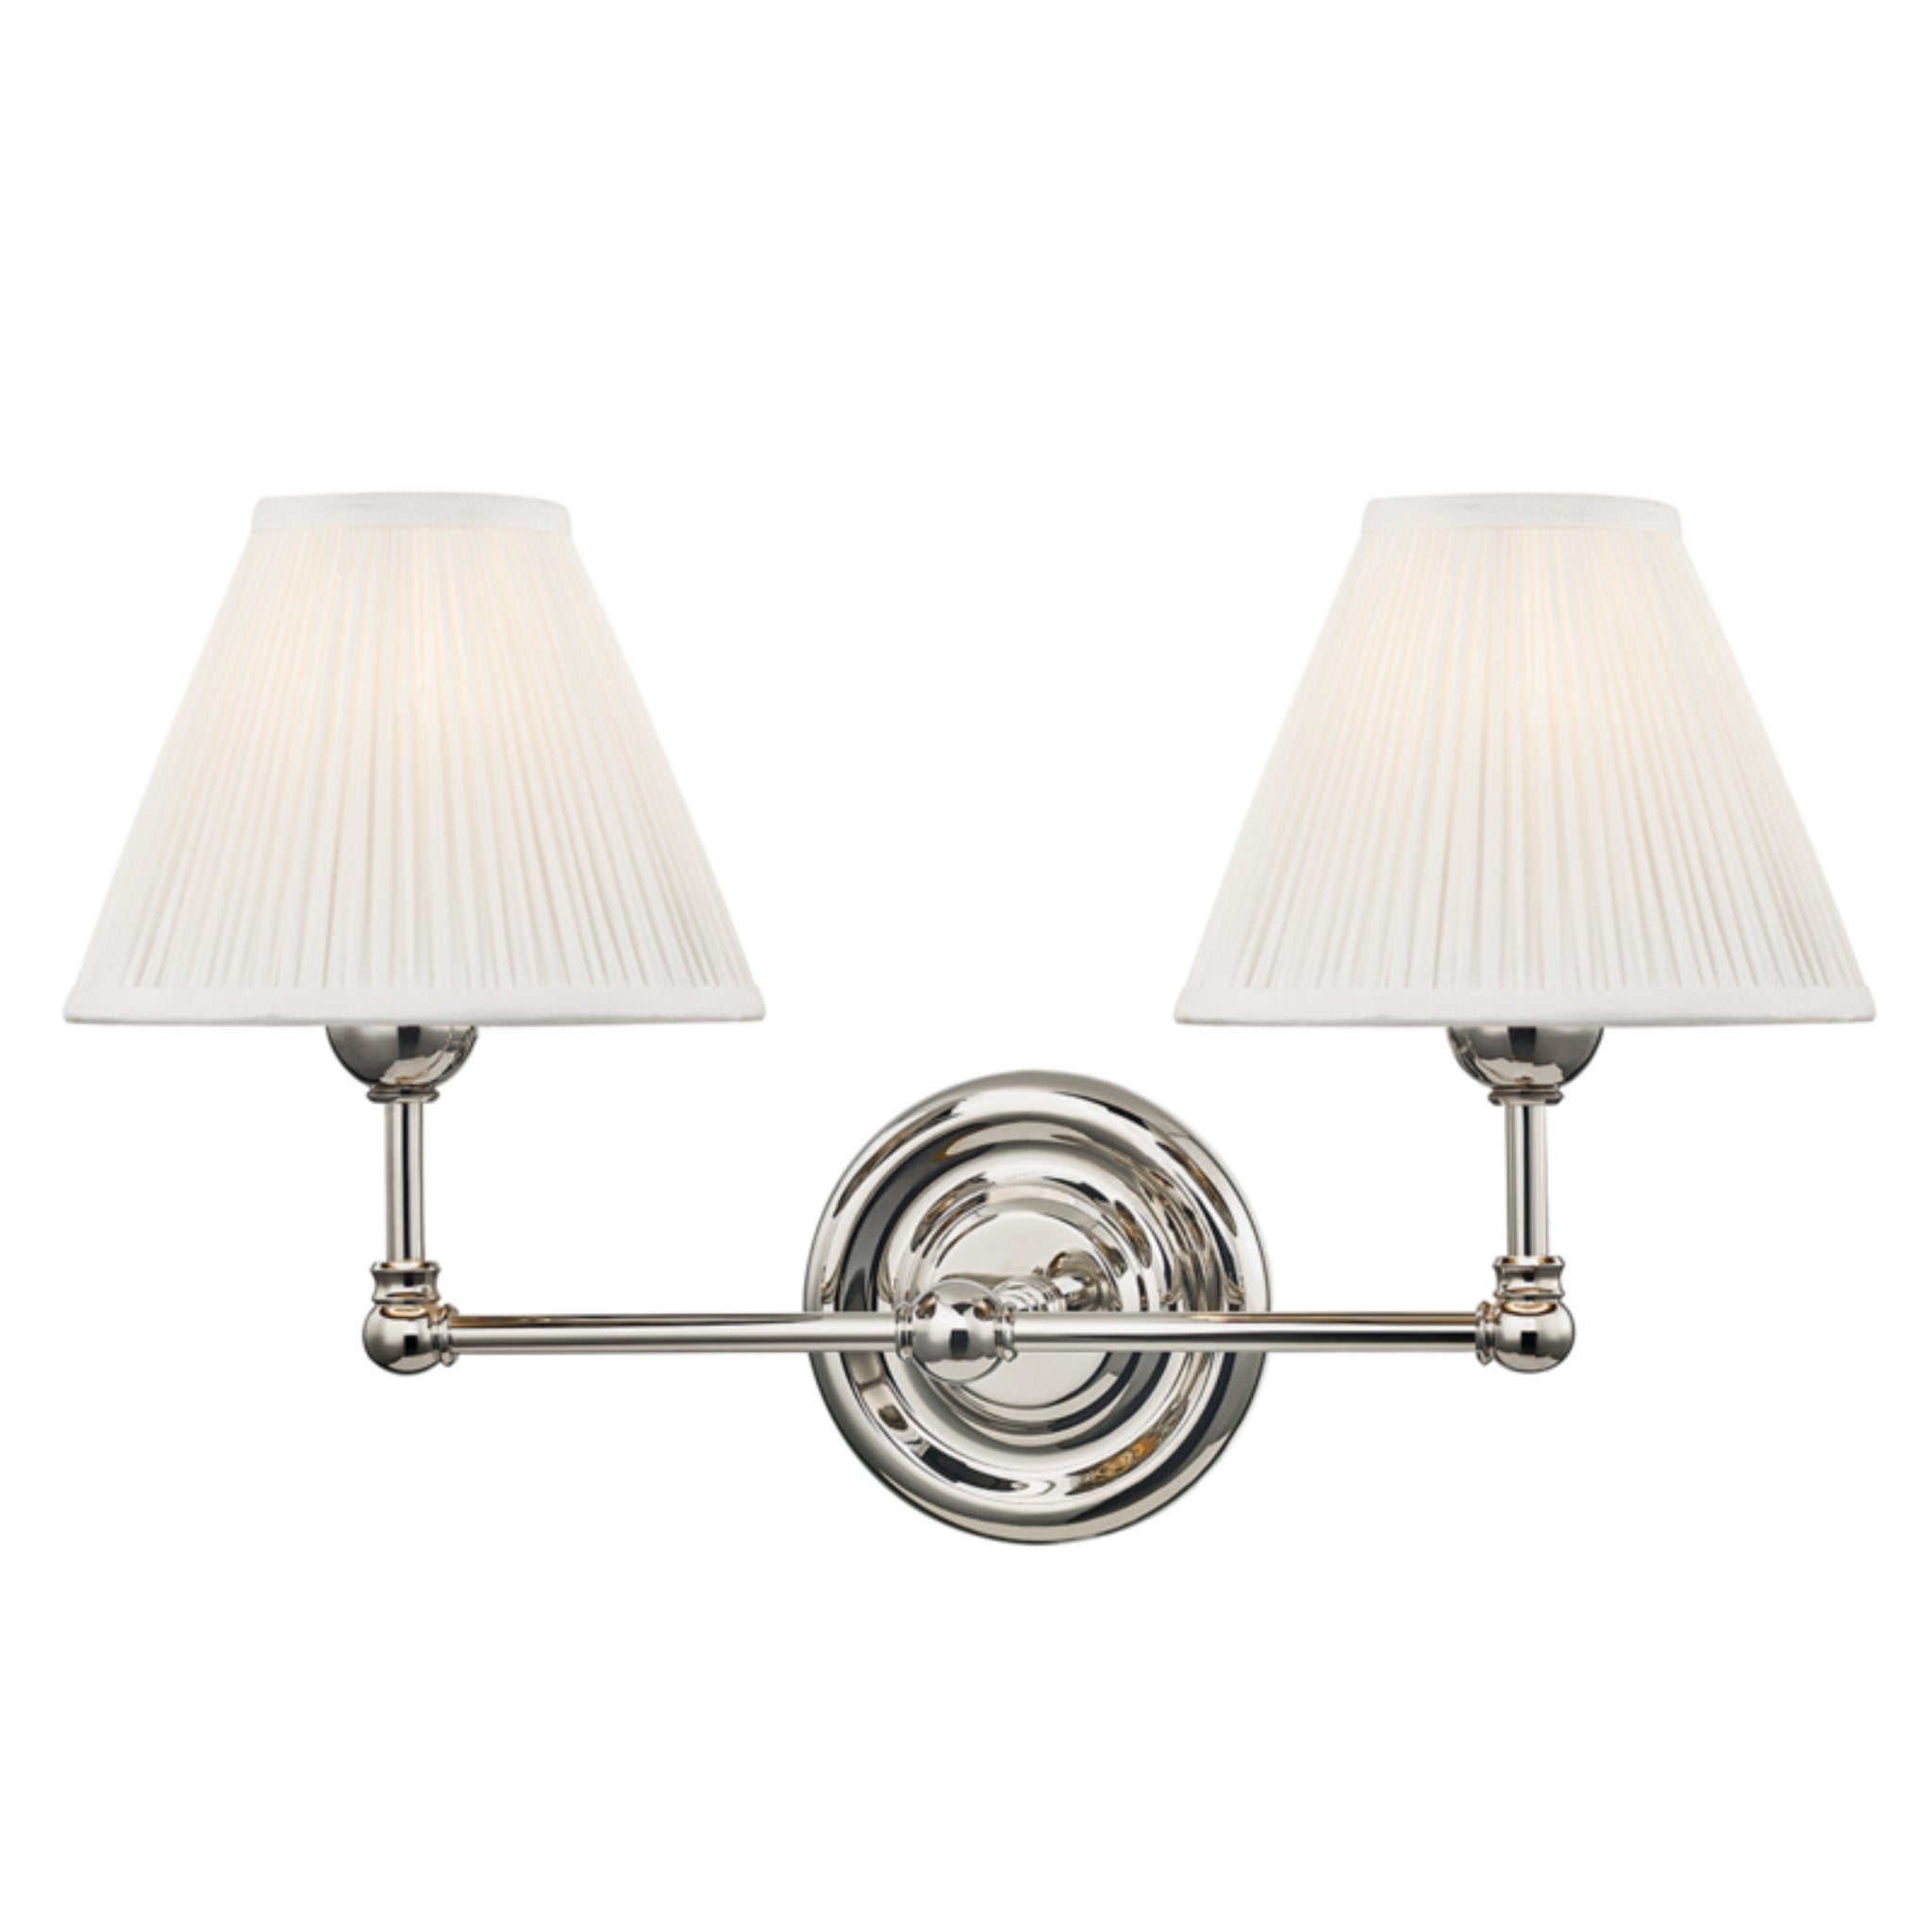 Classic No.1 2 Light Wall Sconce in Polished Nickel by Mark D. Sikes